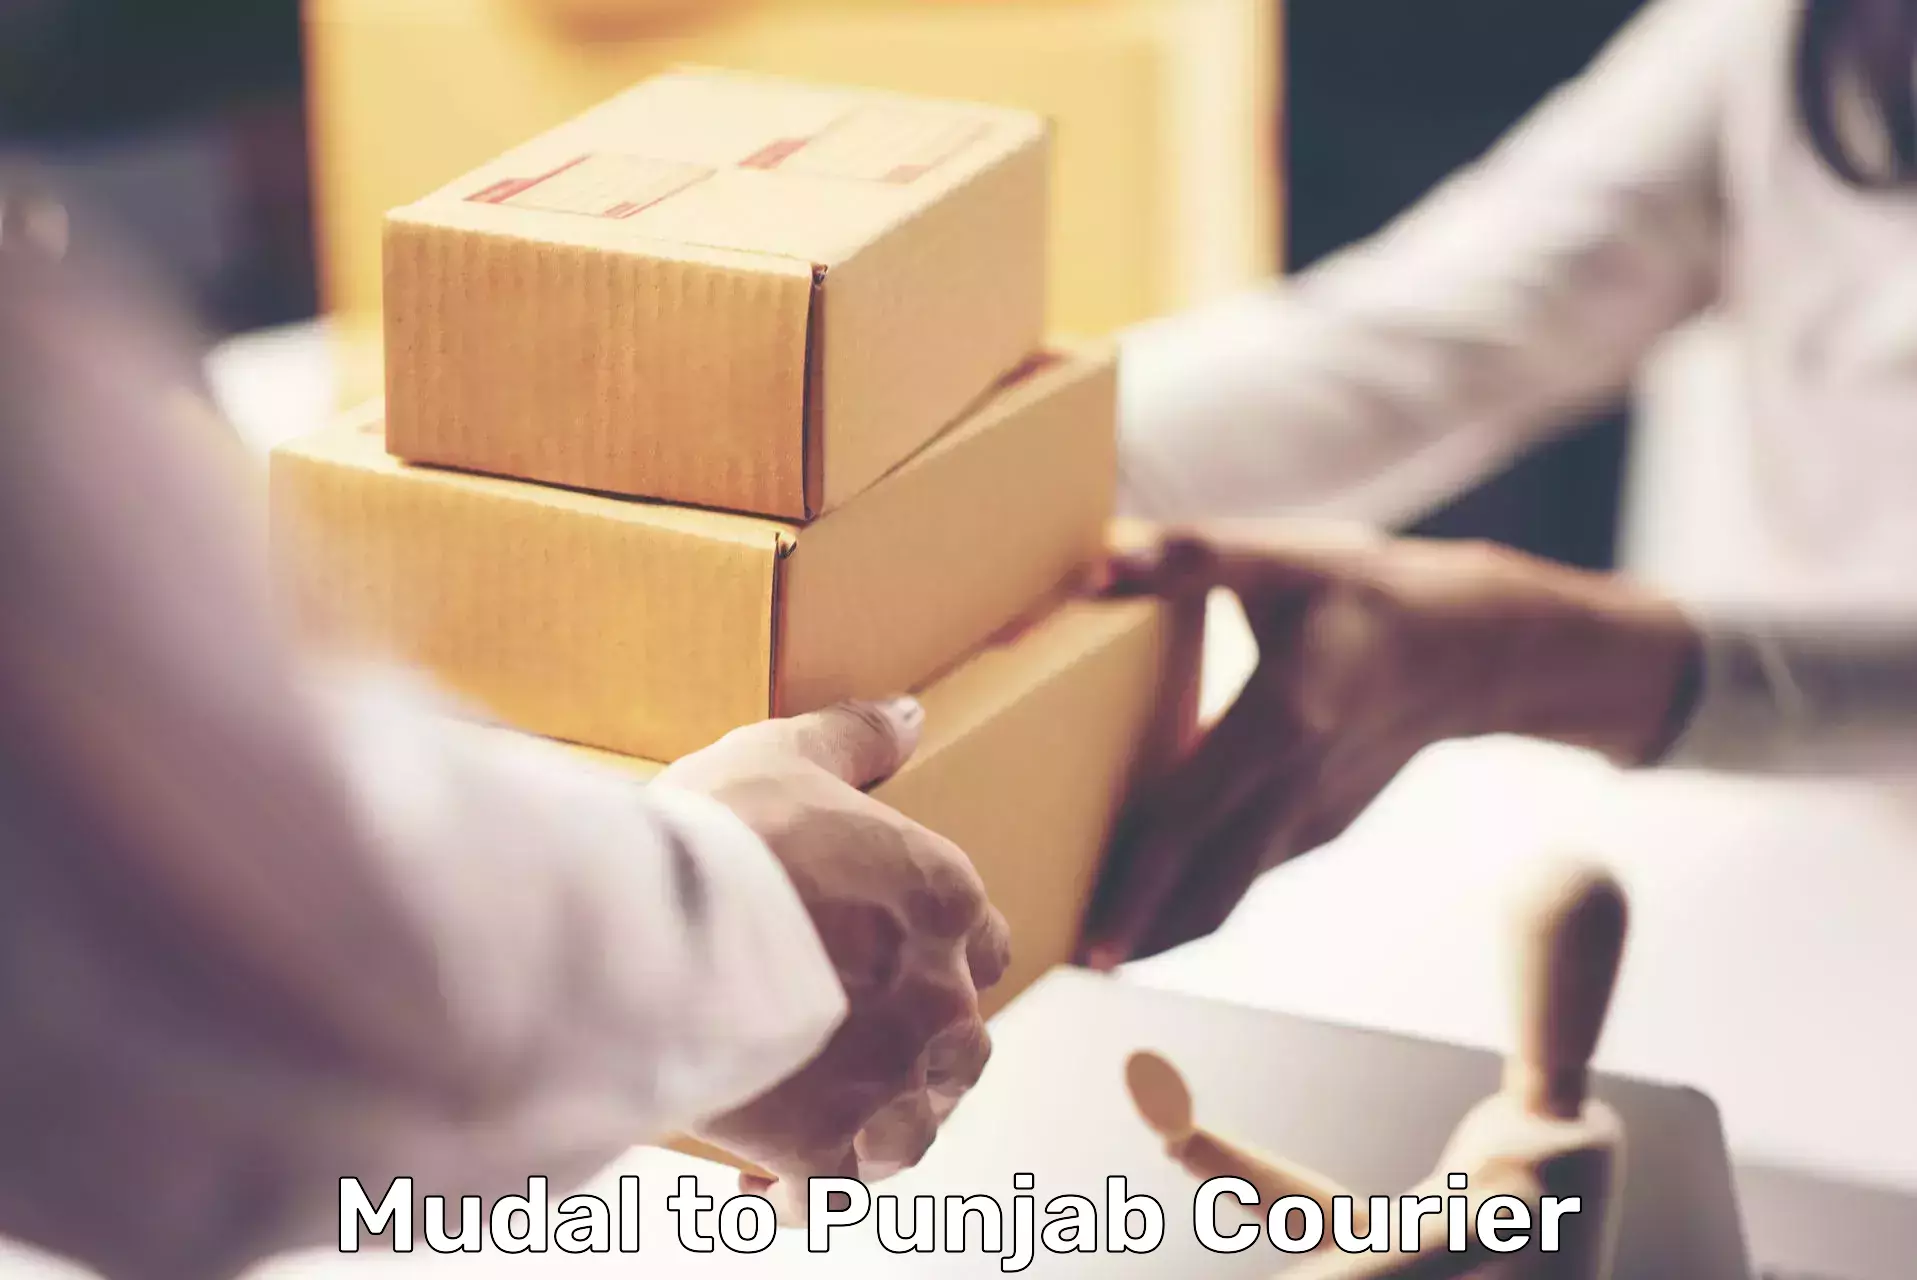 Corporate courier solutions Mudal to Dhuri